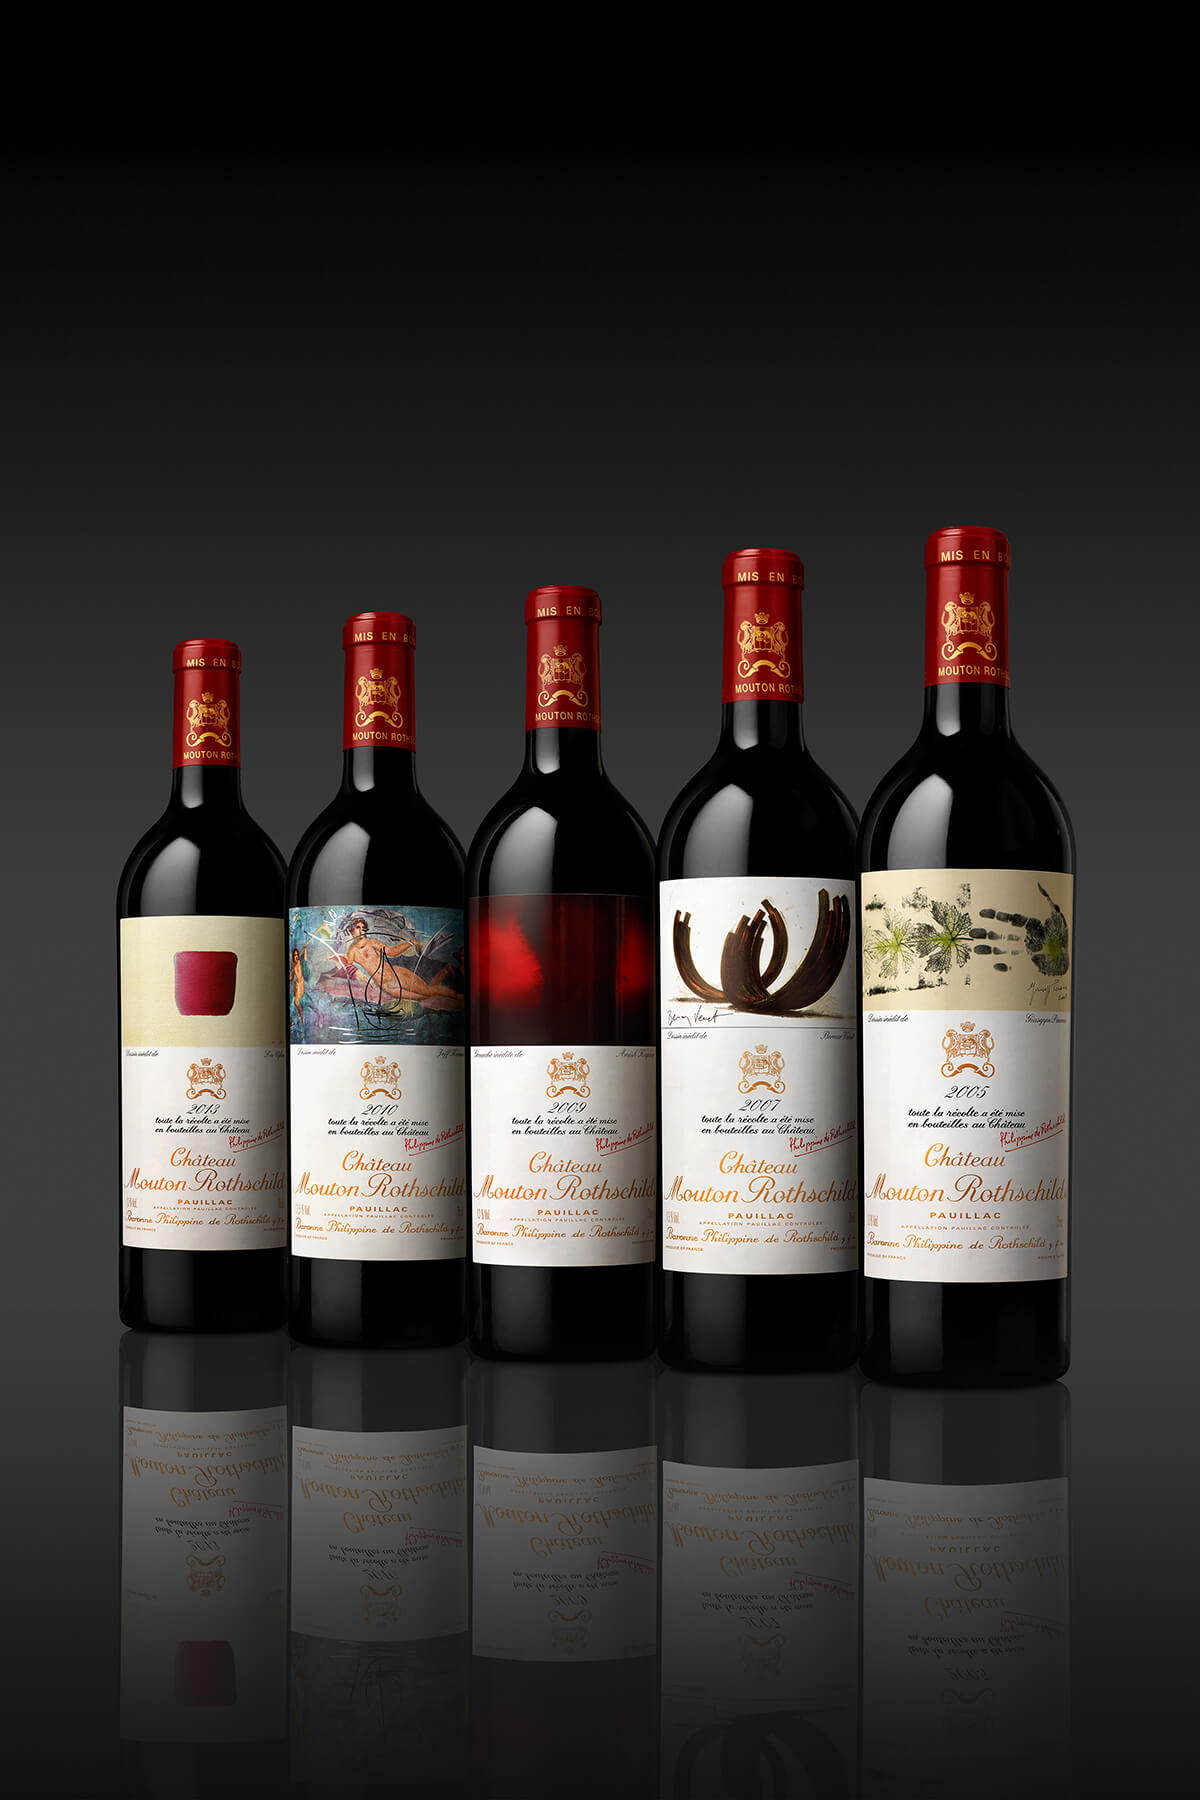 Château Mouton Rothschild vintage wines with labels designed by contemporary artists